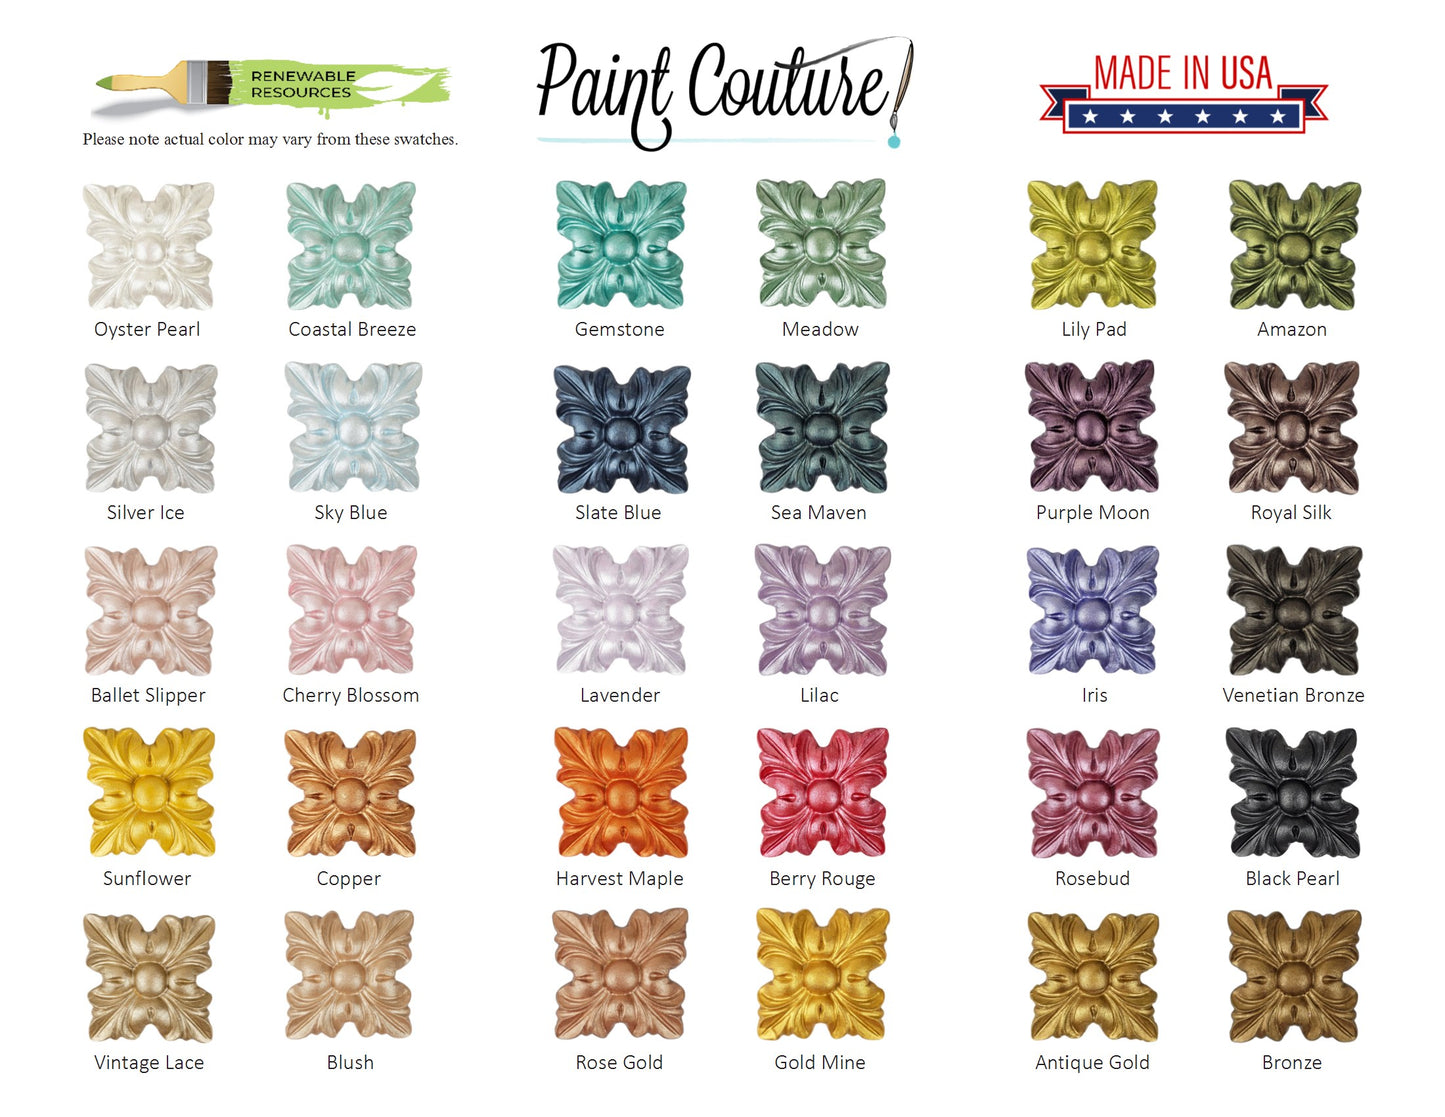 Paint Couture Lux Metallic Paint Silver Ice